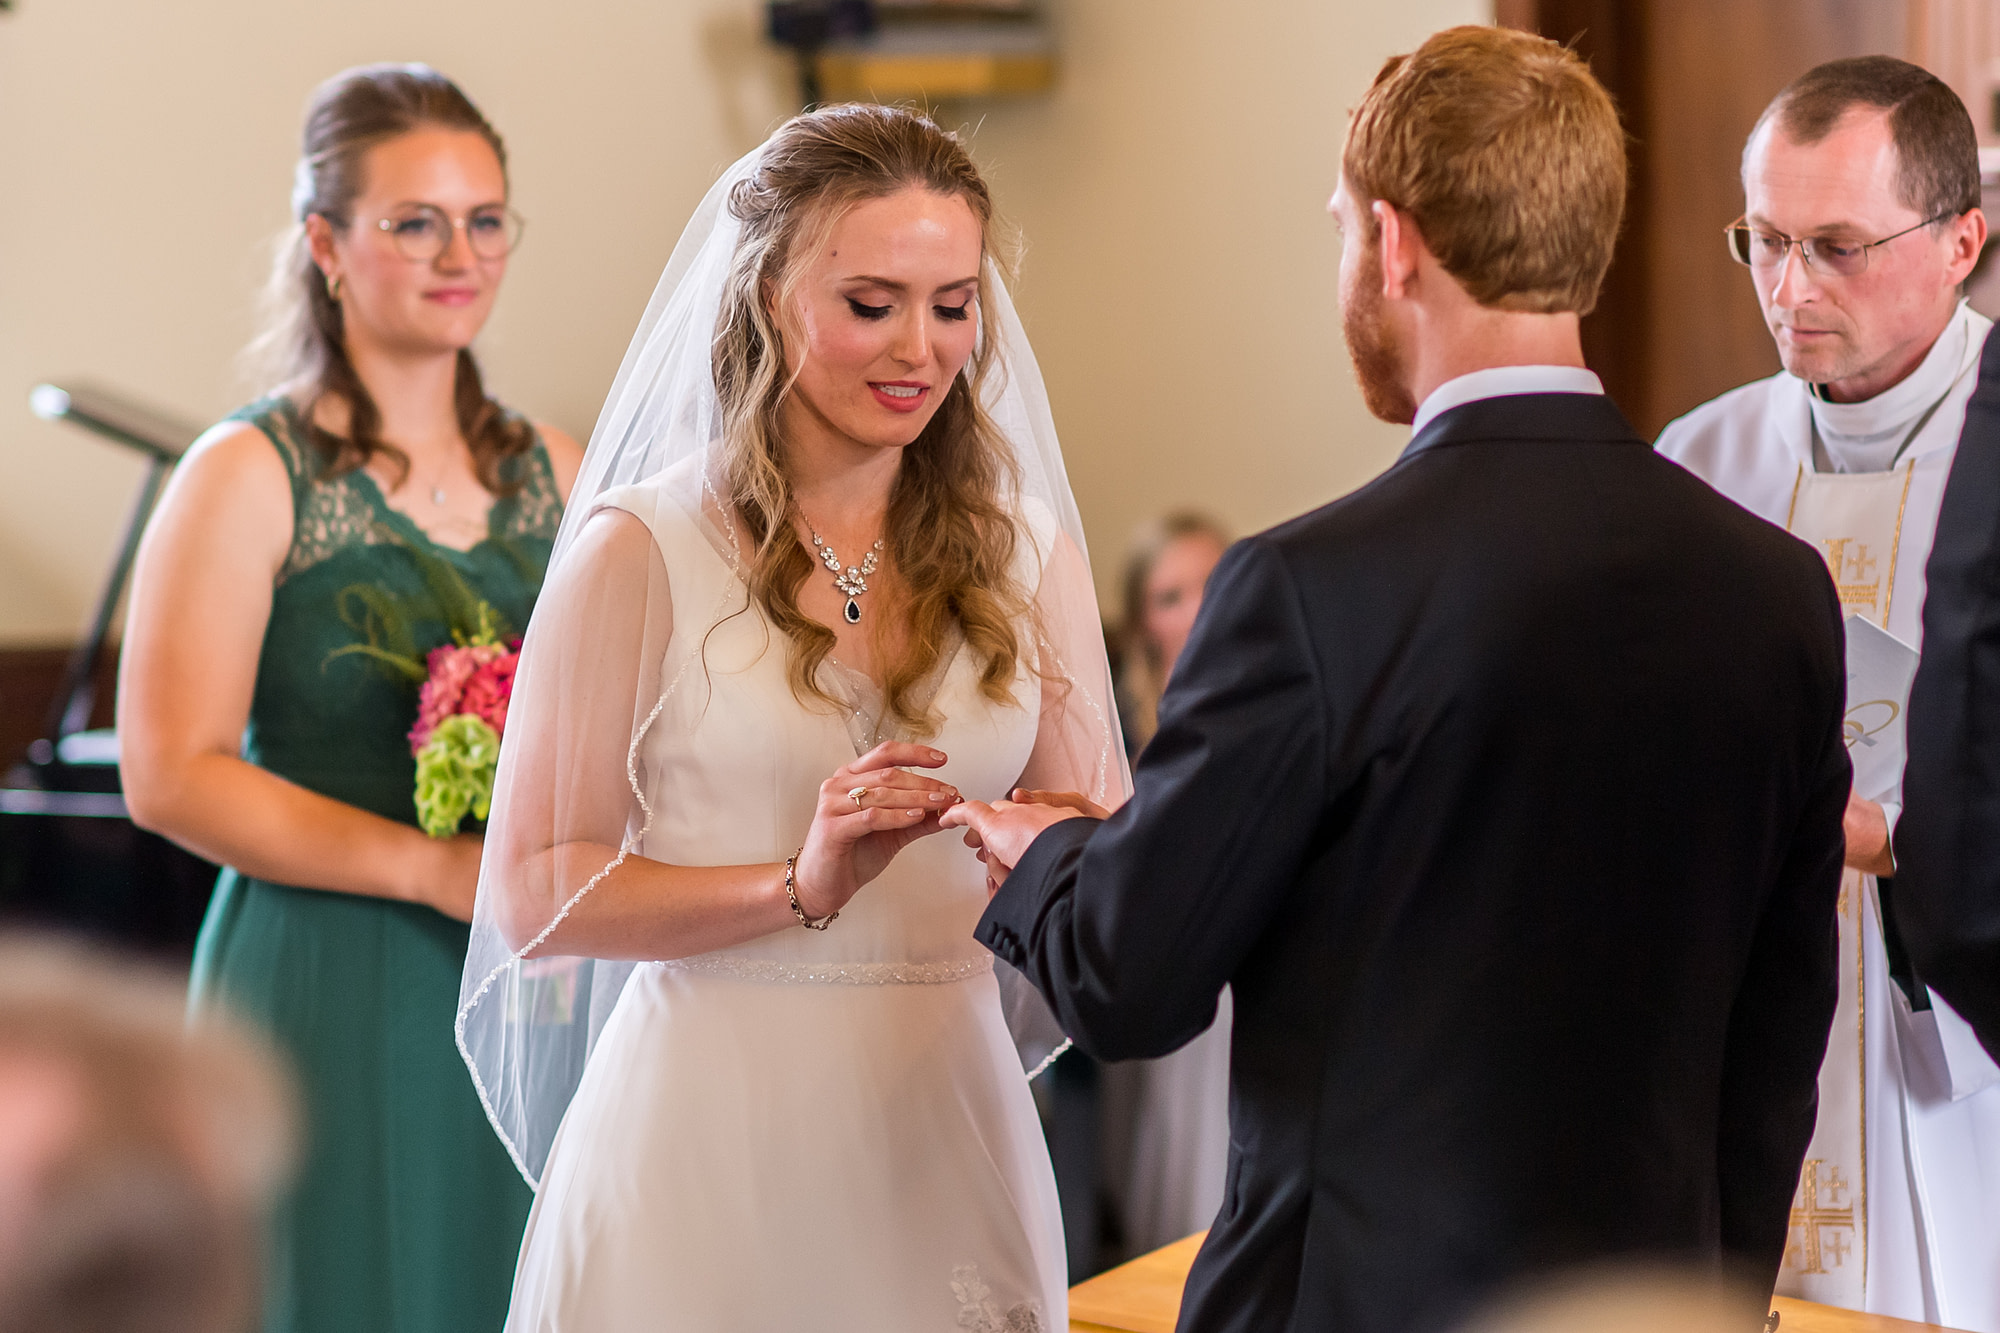 The bride puts a ring on the groom's finger during a Telluride, Colorado, wedding at St. Patrick's Catholic Church.